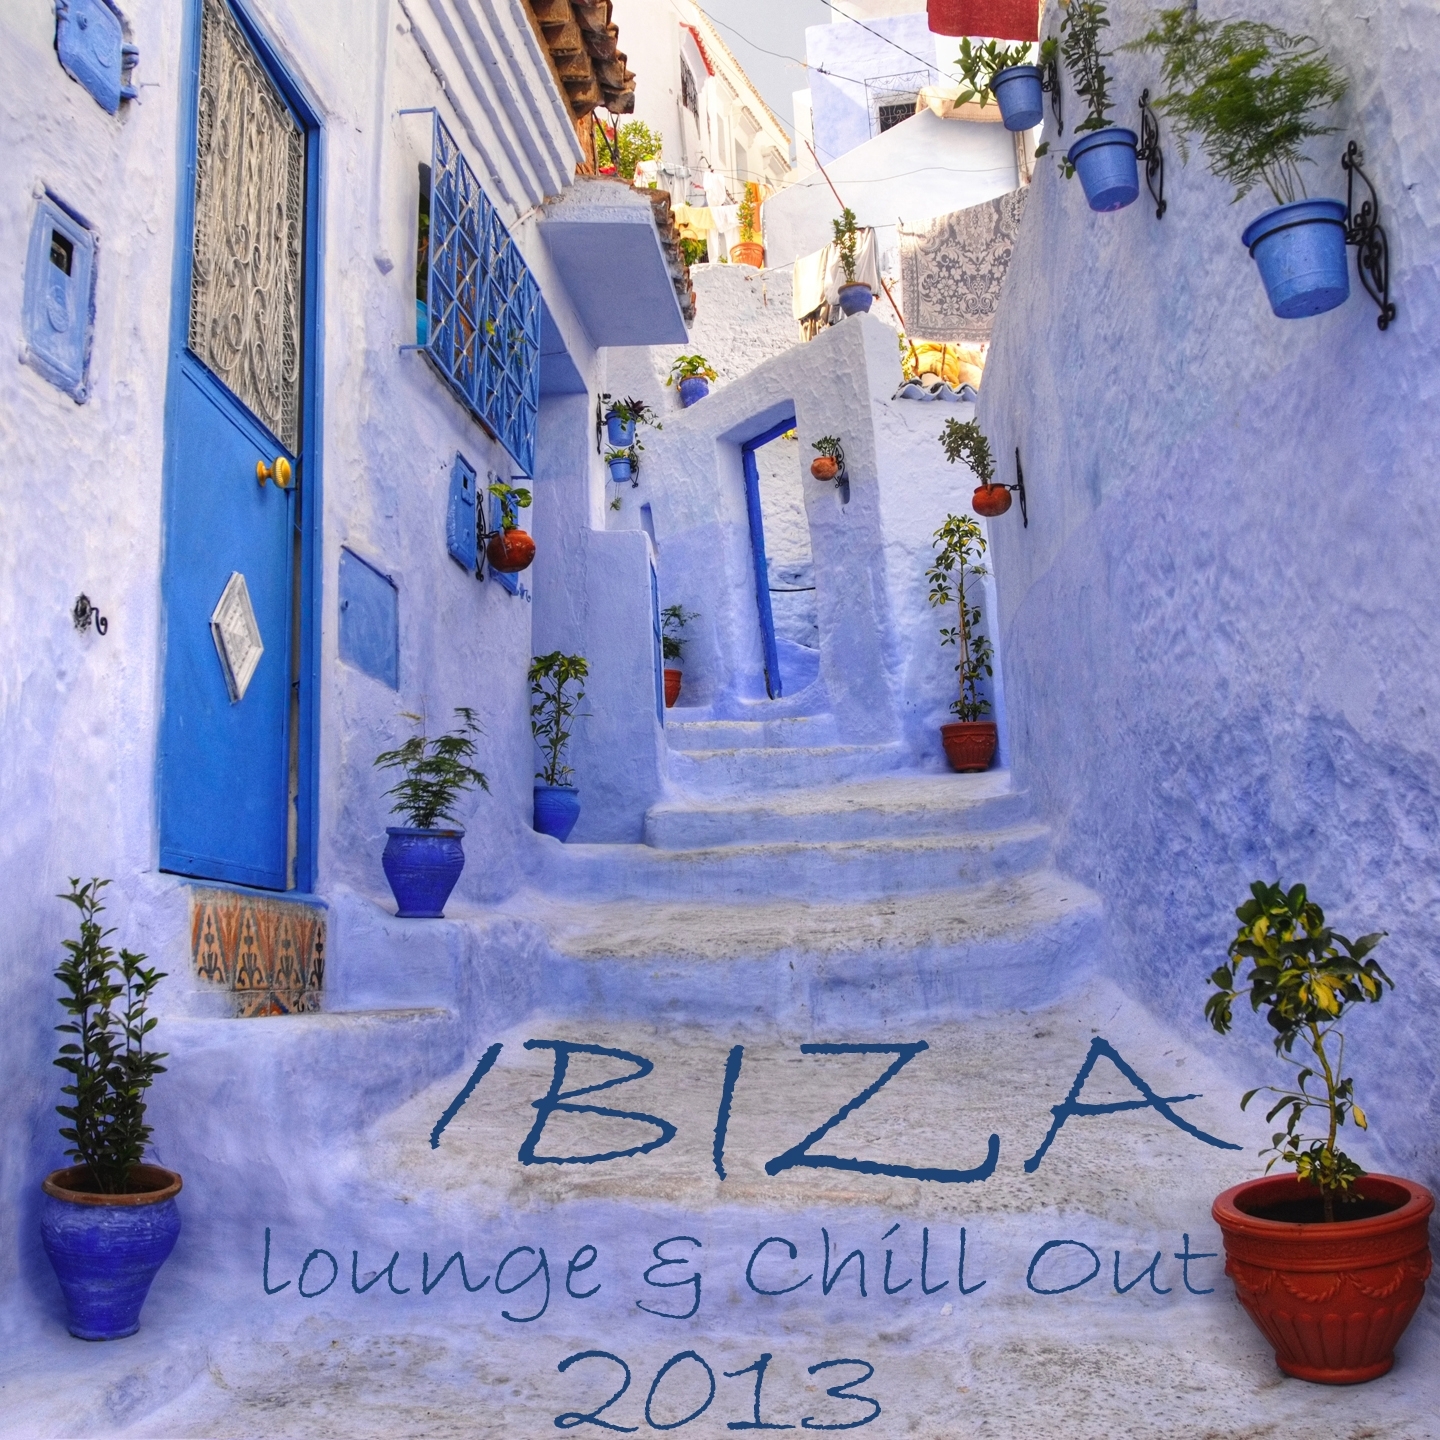 Ibiza Lounge & Chill Out 2013 (Picturesque Island Sunset Sounds)